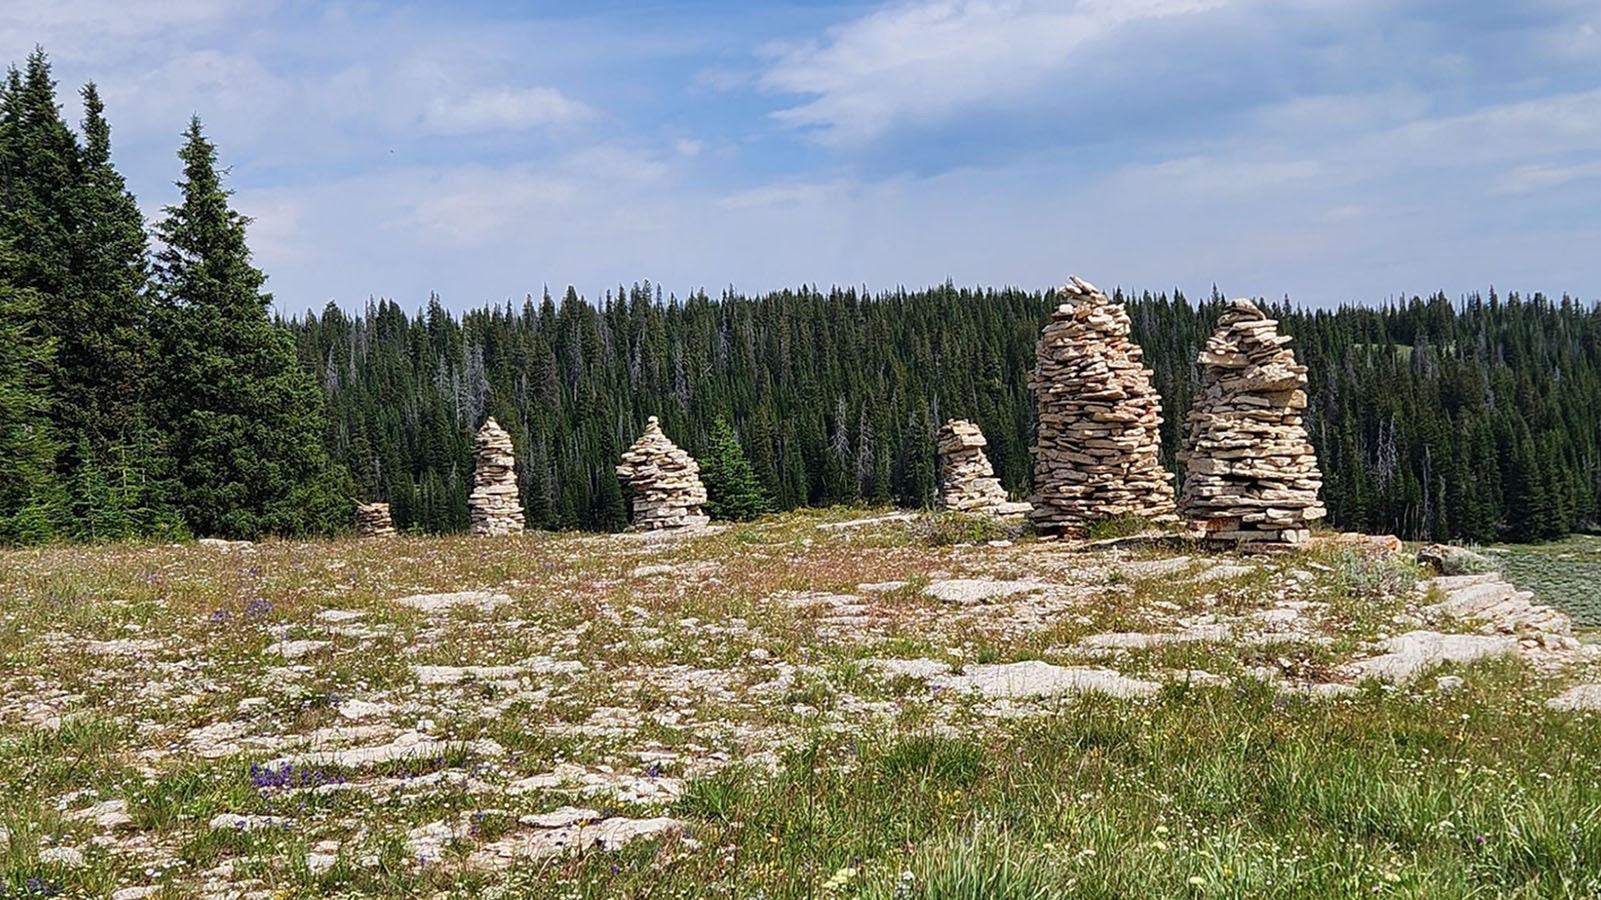 Someone built at least five large cairns in the Bighorn National Forest. Photos of the carefully piled rocks has created some controversy.